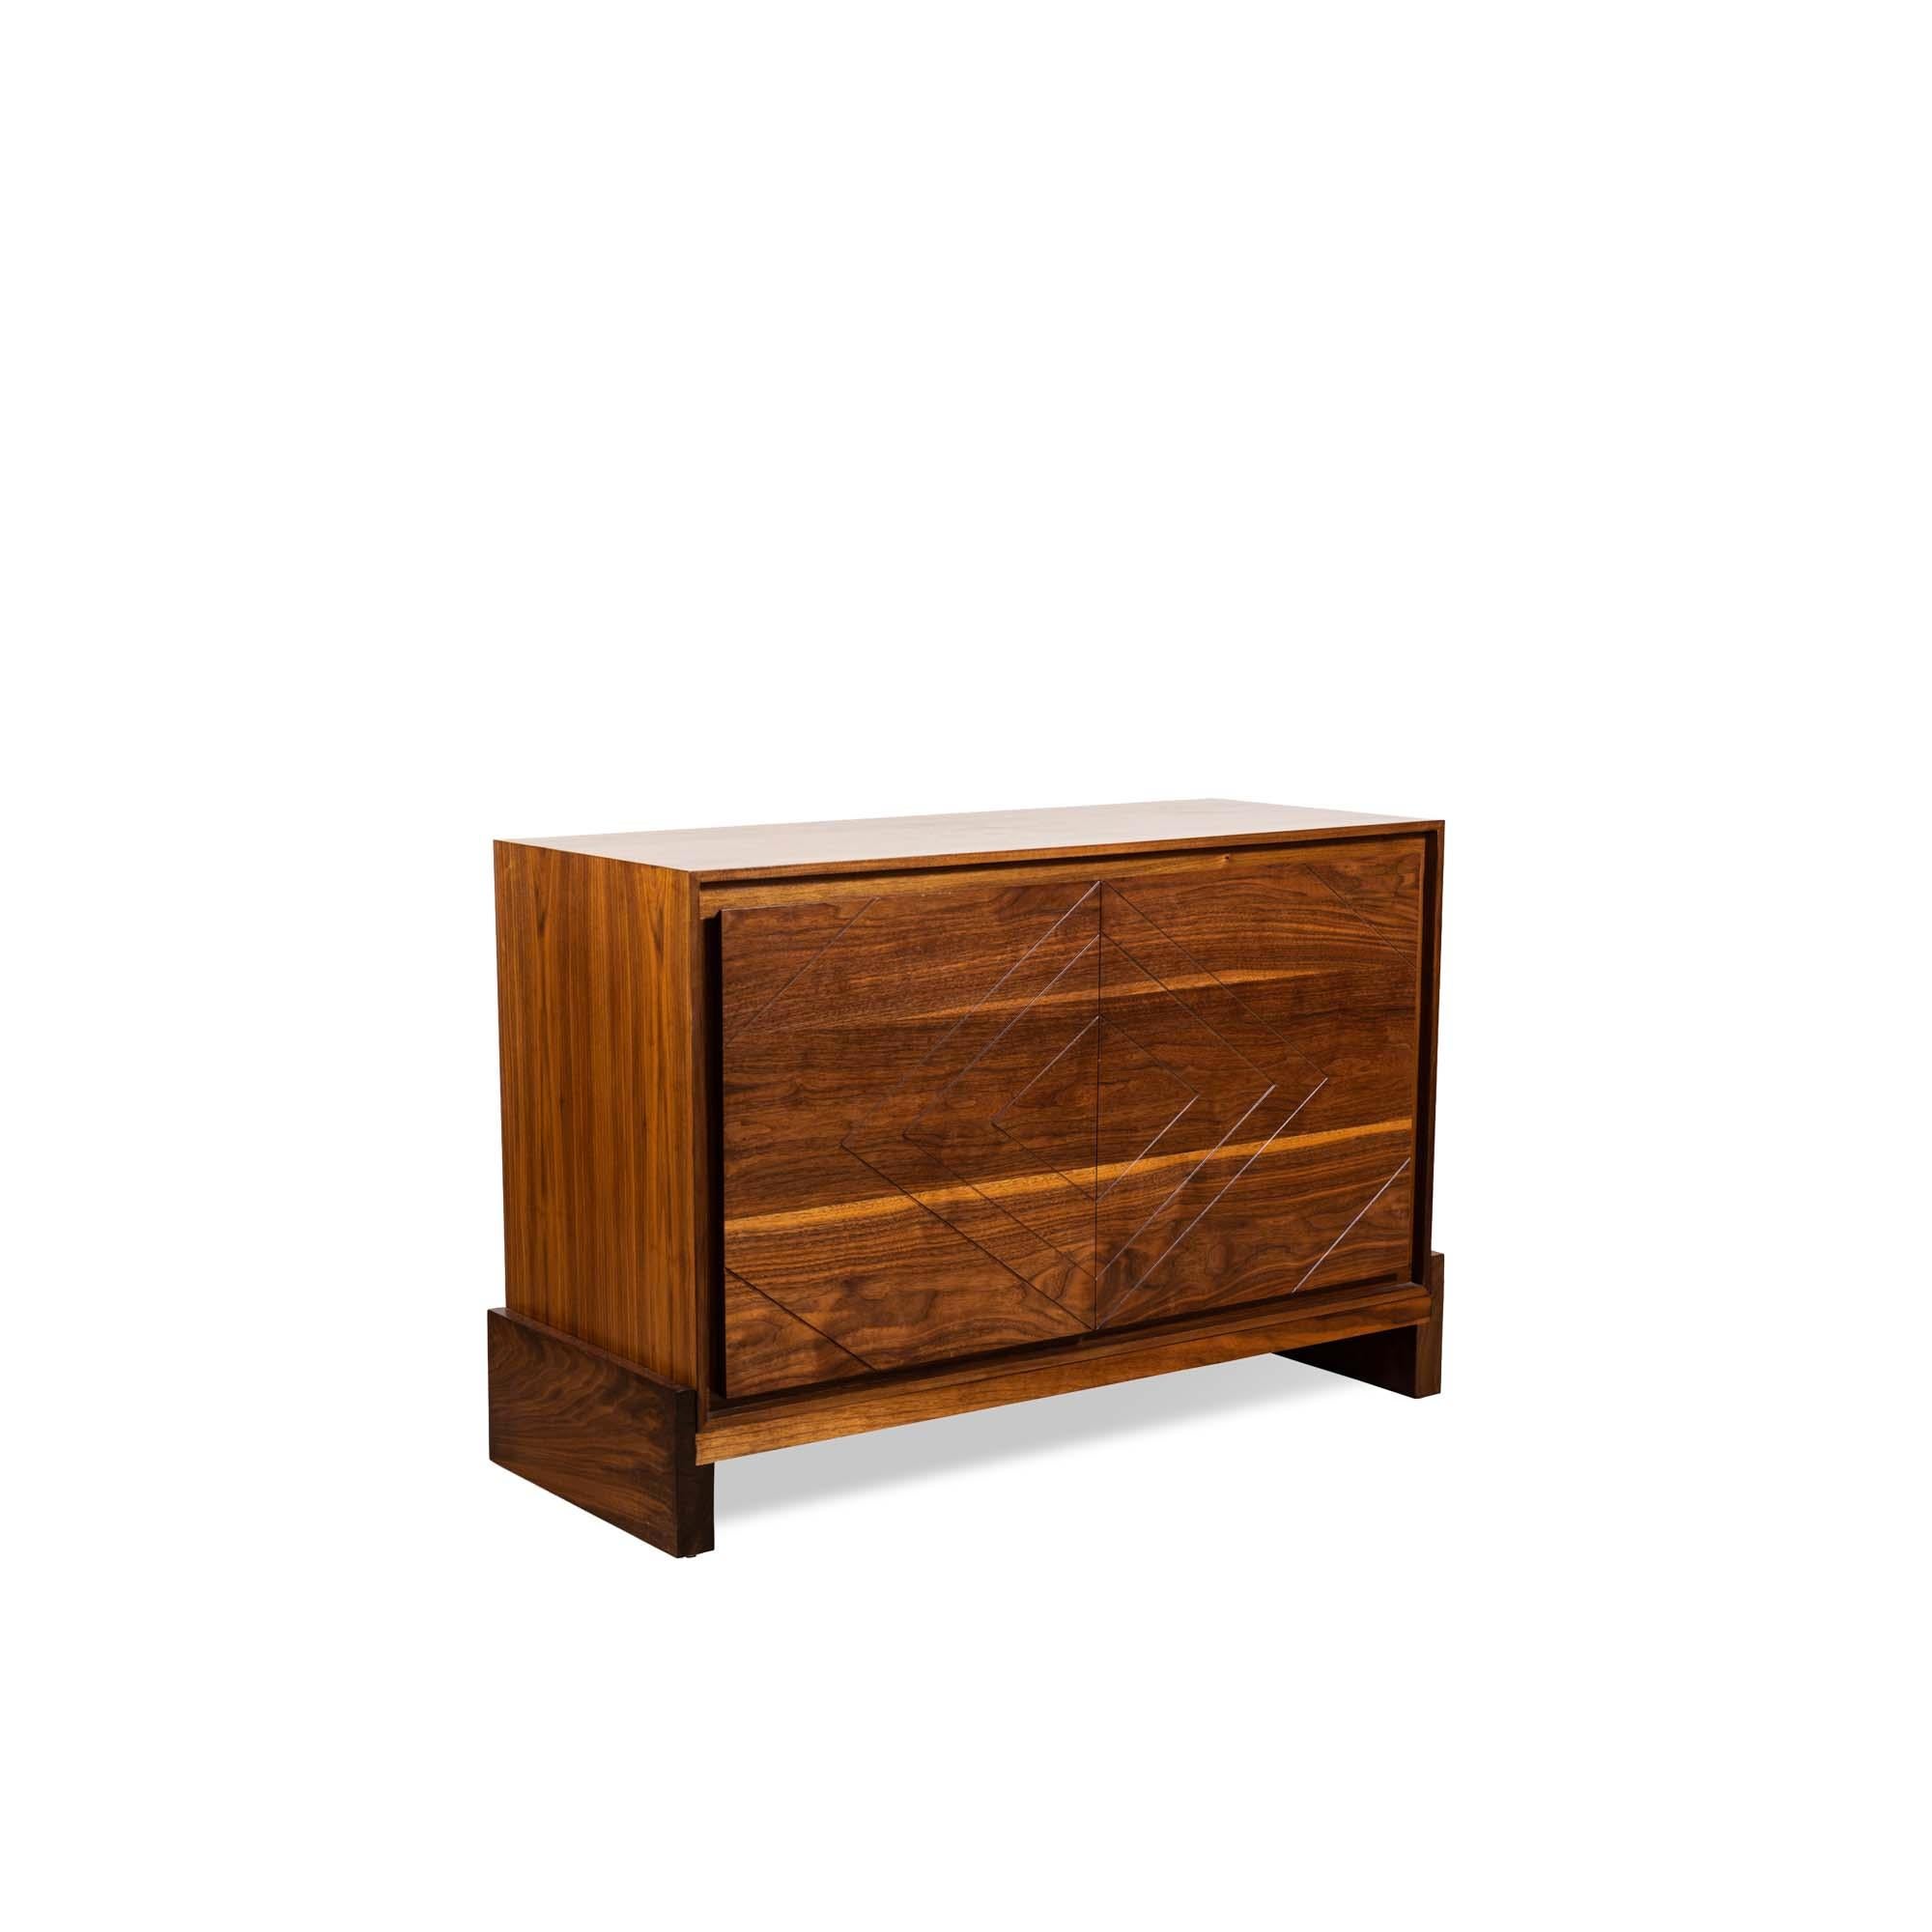 The 2-door platform cabinet features a solid American walnut or white oak front, base and scribed doors. Shown here in light walnut.

The Lawson-Fenning Collection is designed and handmade in Los Angeles, California.
 